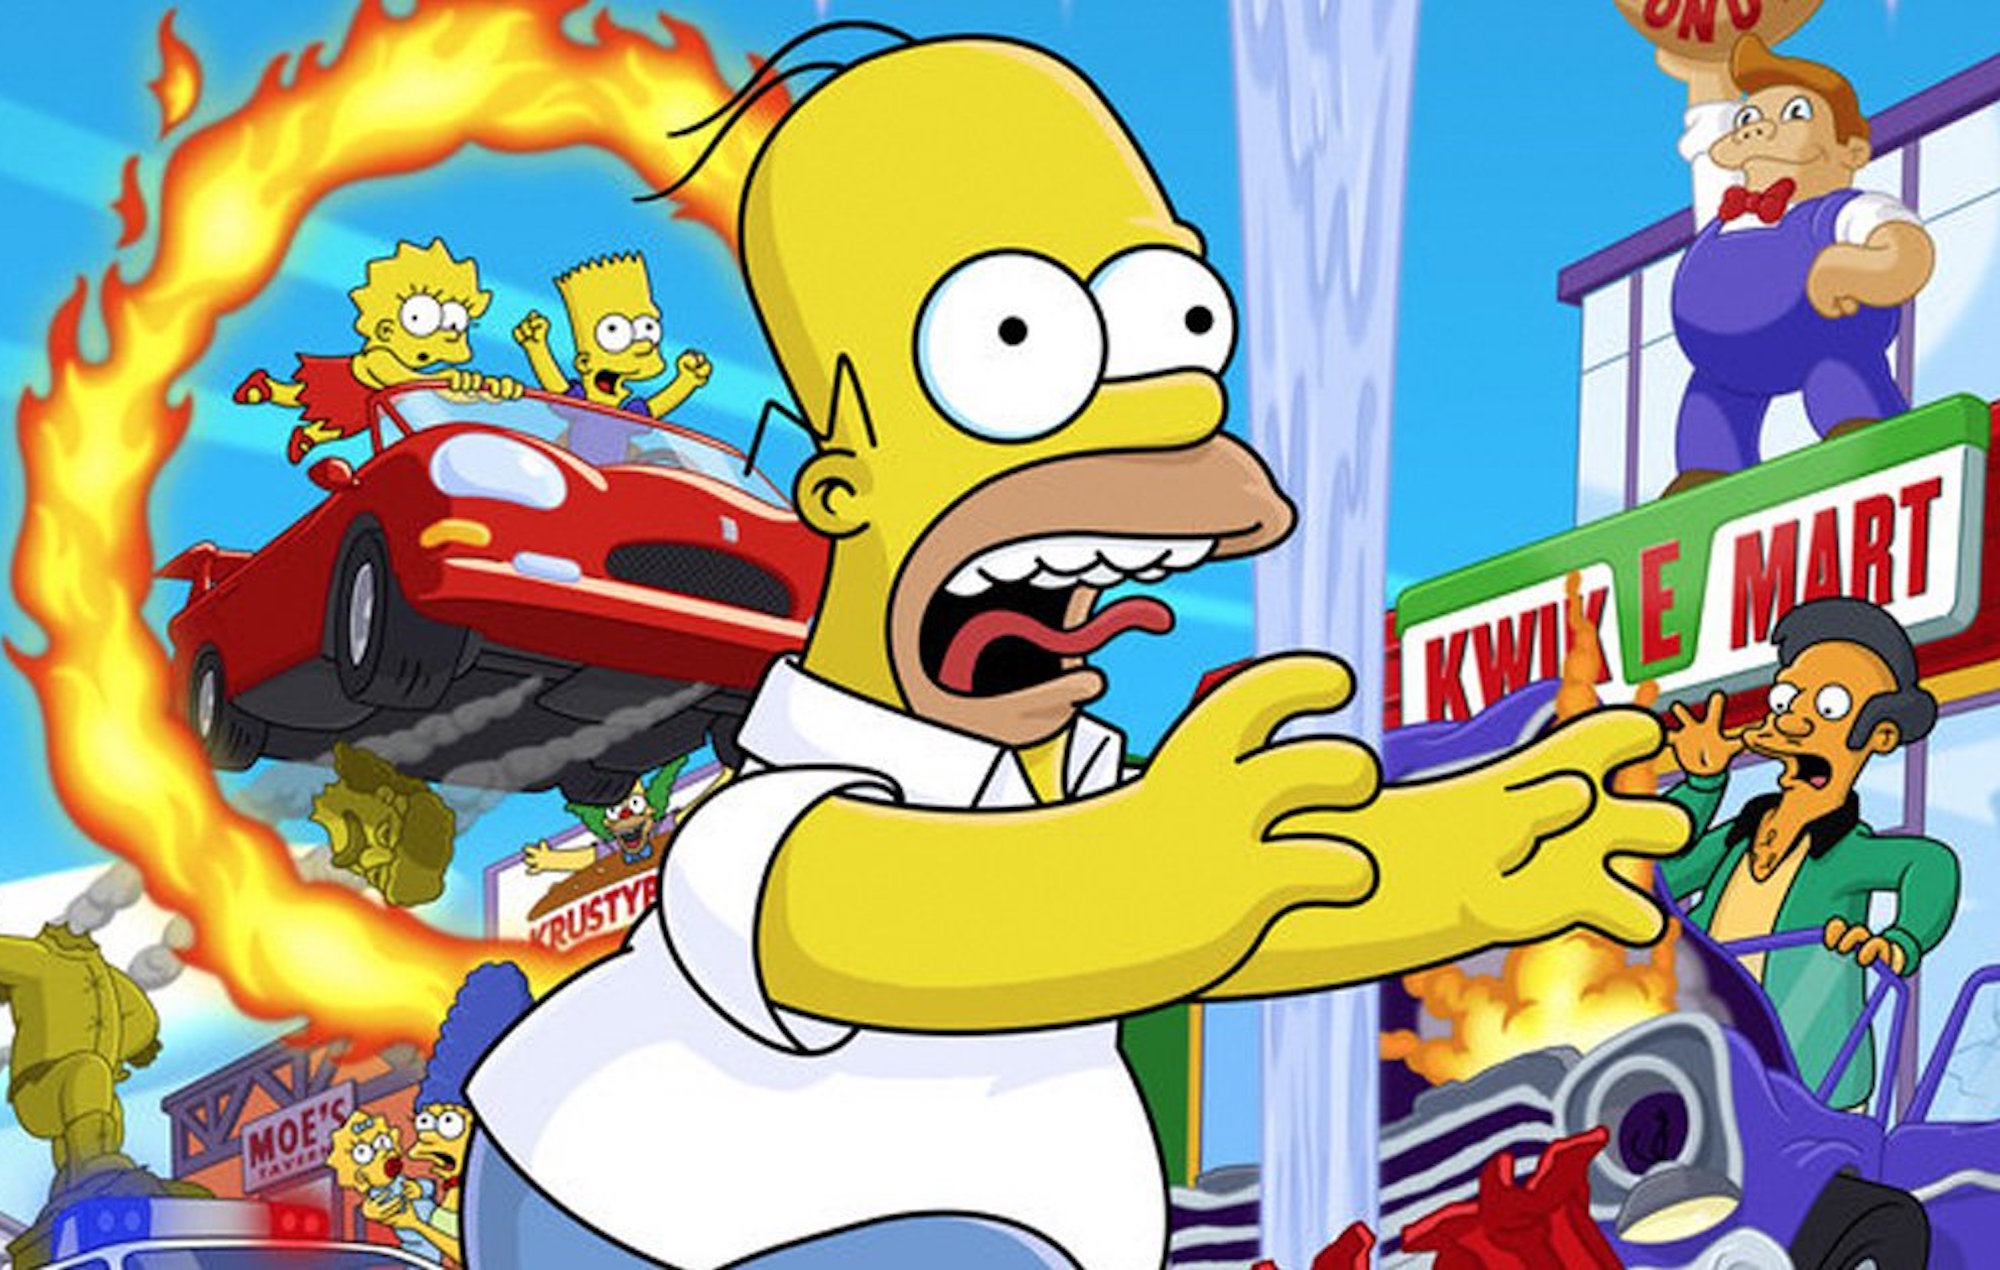 The Simpsons Hit & Run is one of the greatest video games of all time and there’s no arguing with that